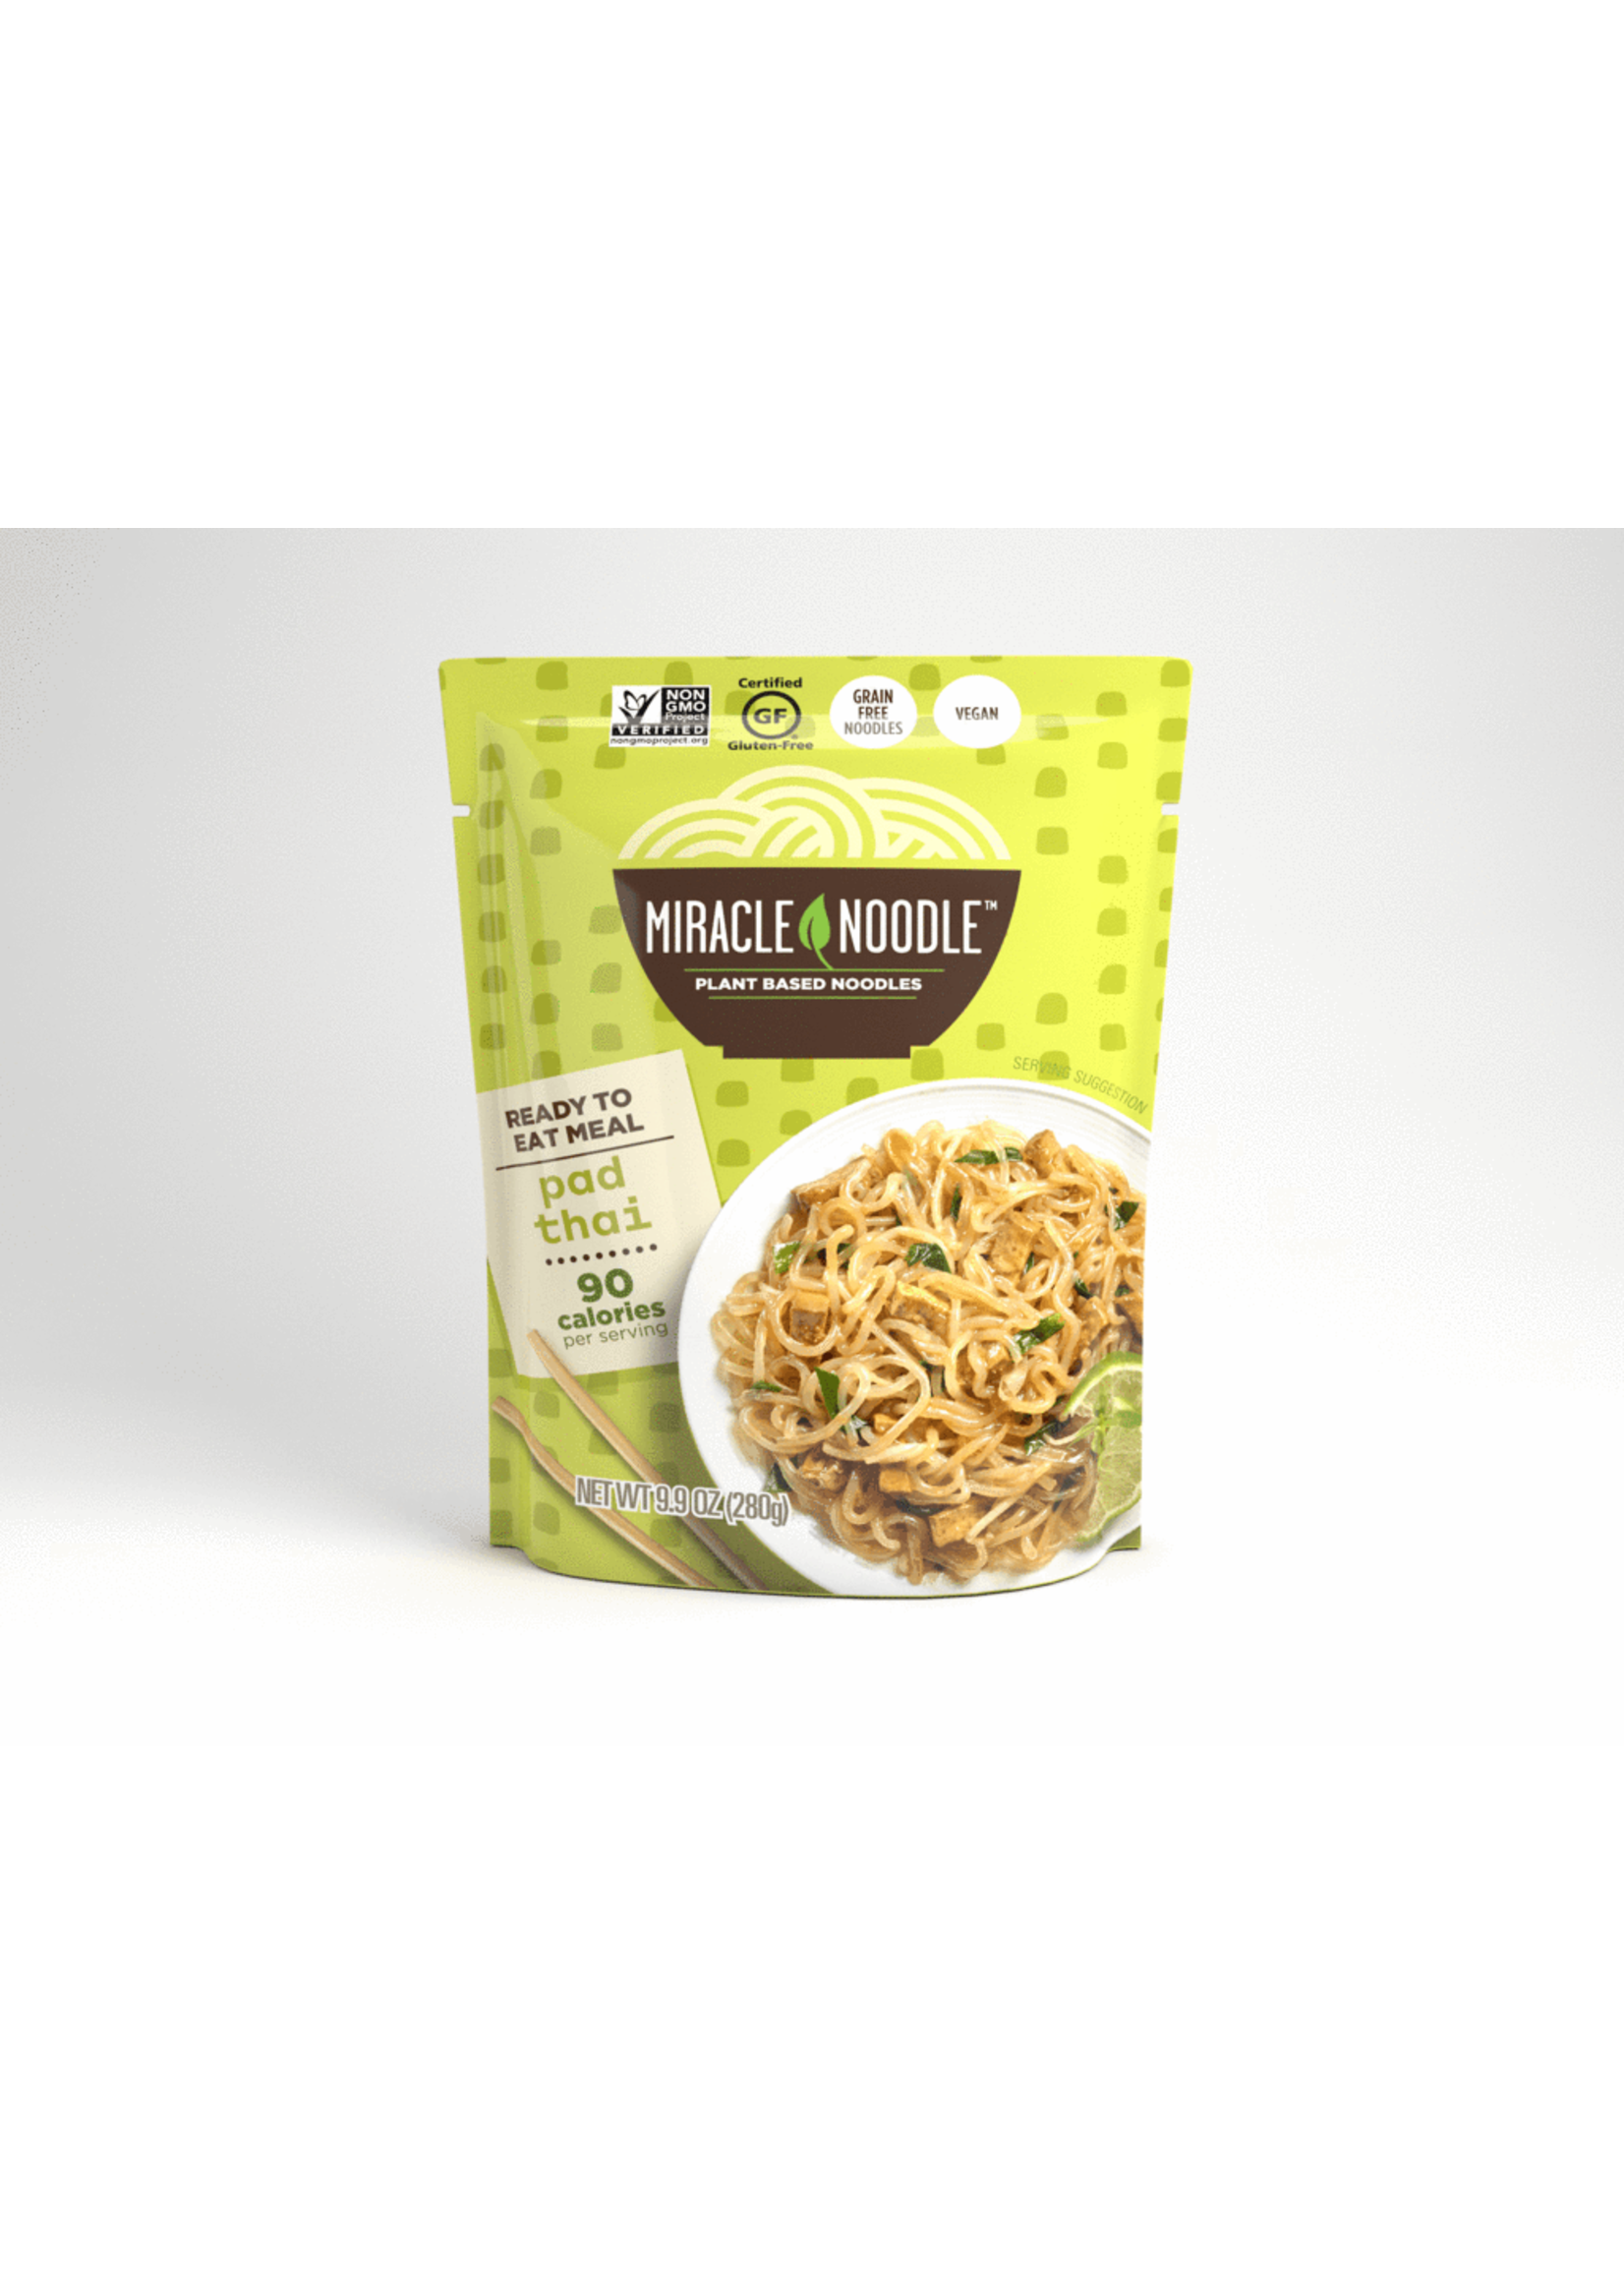 Miracle Noodle Miracle Noodle Pad Thai